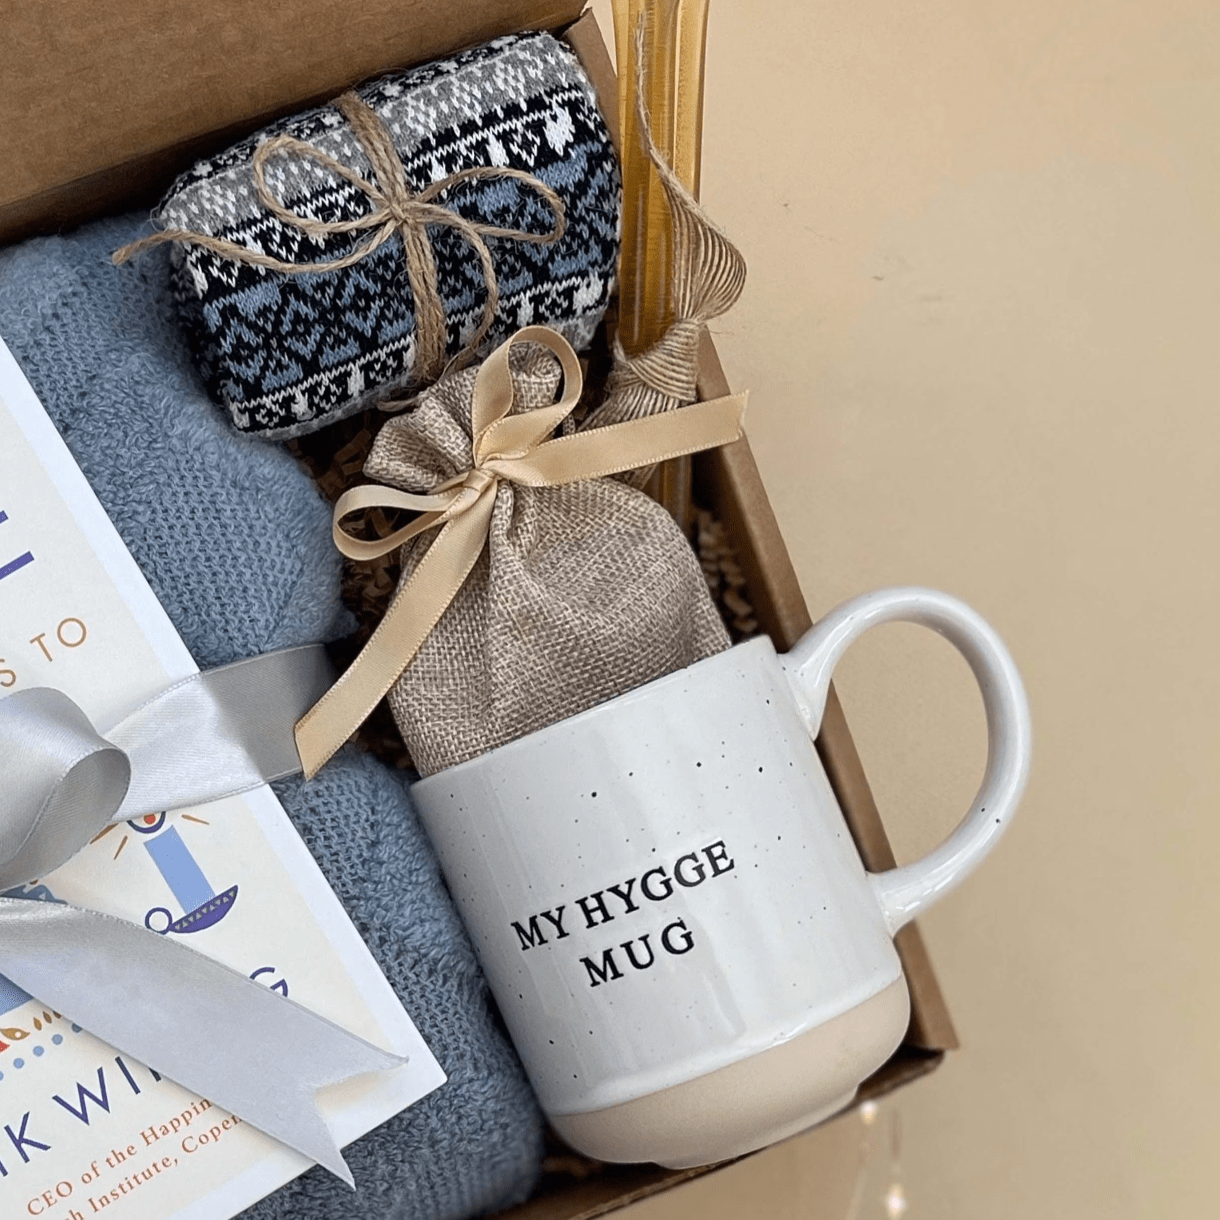 Extra Cozy Hygge Box Hug in Box, Gift Set for Him, Birthday Box for Her,  Mom, Dad, Brother, Husband Gift, Long Distance Friend Gift NWBX 